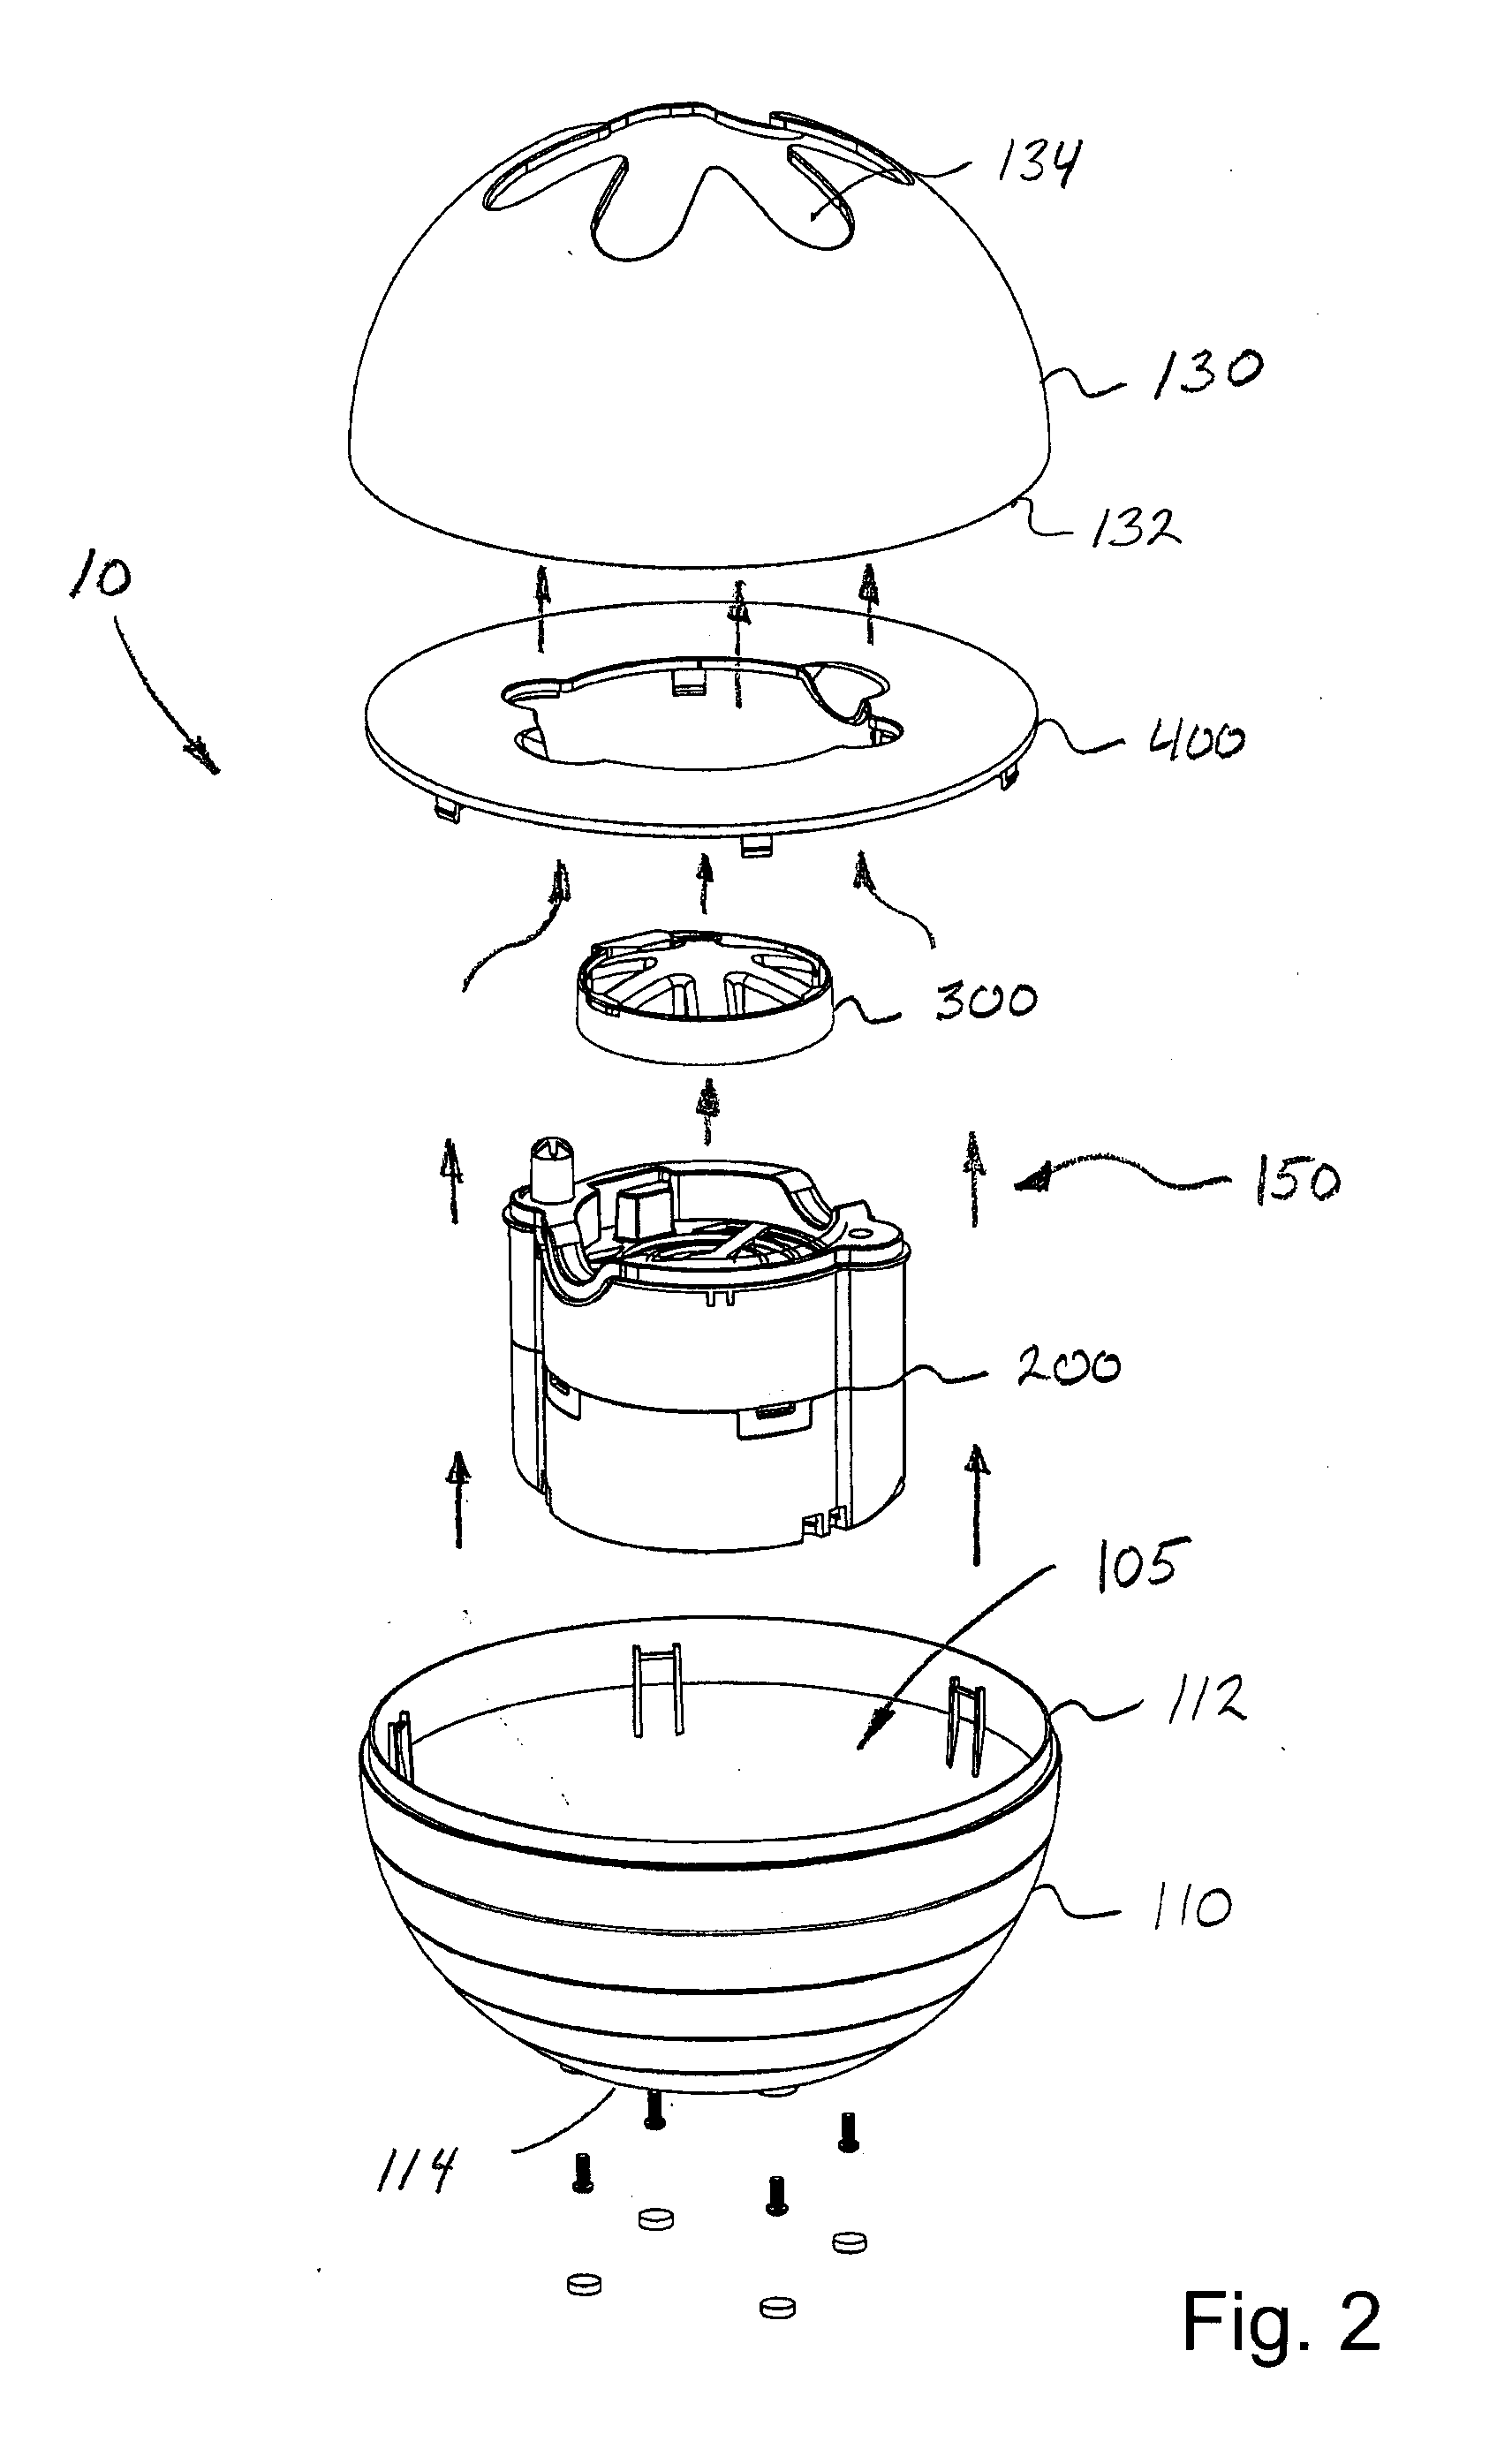 Device and Method for Dispensing Volatile Compounds and Cartridge for Use Therewith